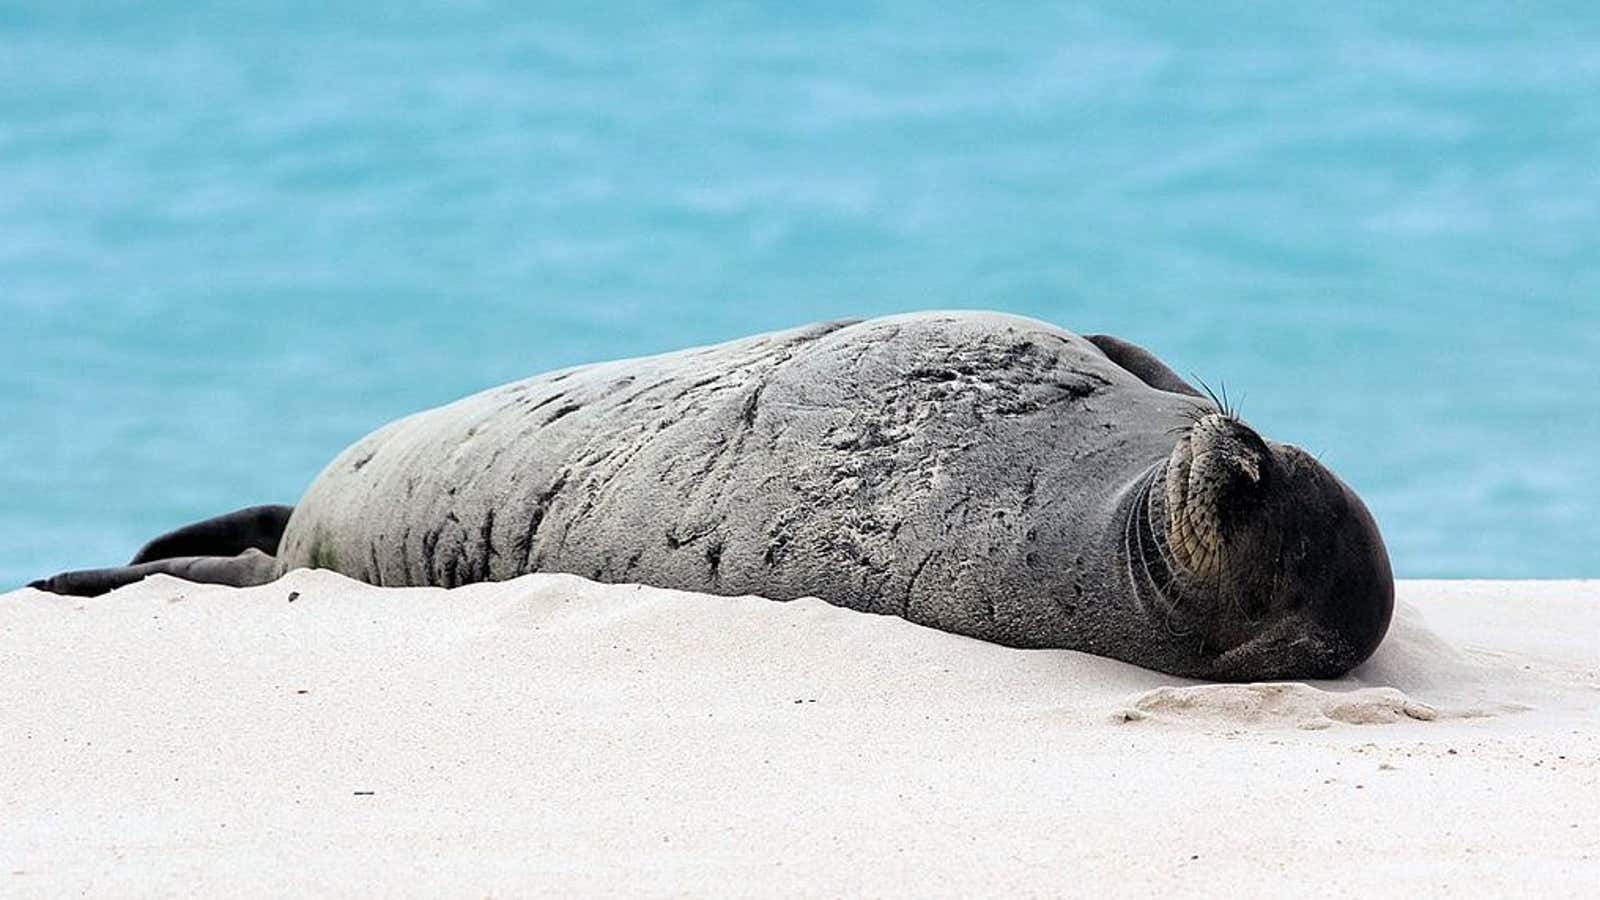 There are around 1,400 Hawaiian monk seals left in the wild.